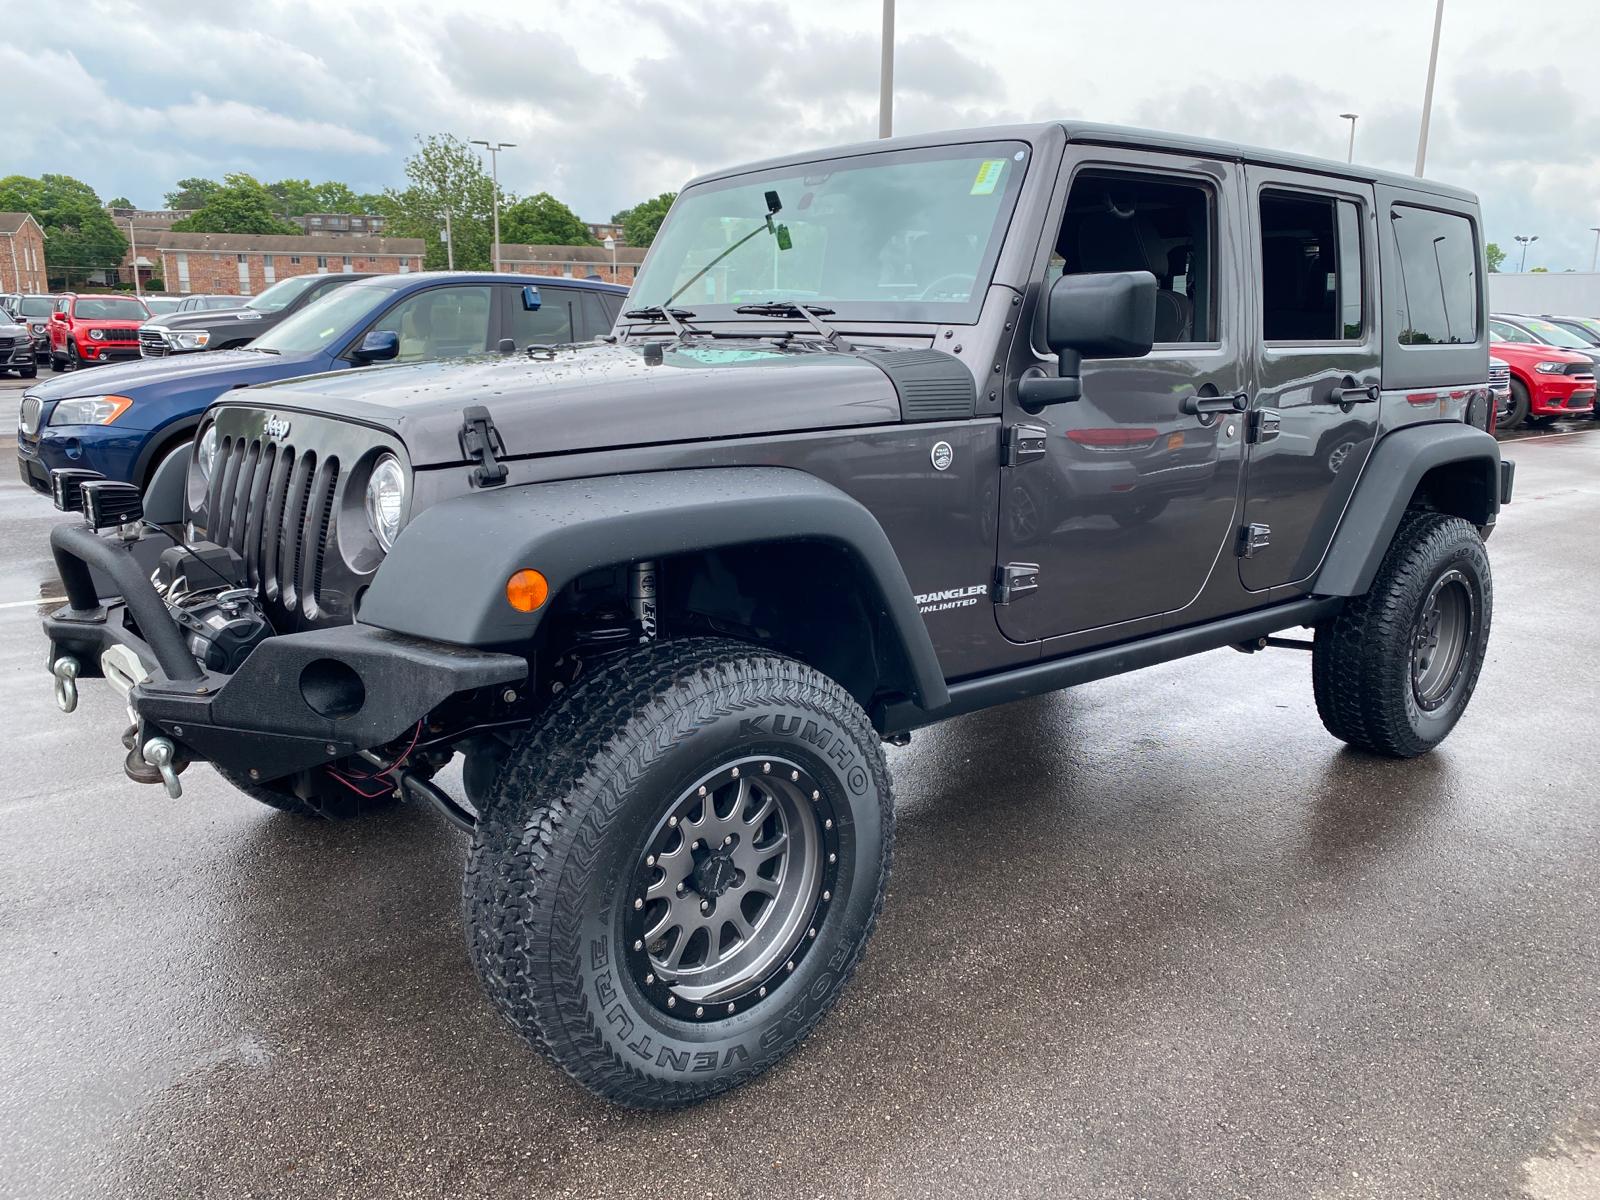 Certified PreOwned 2017 Jeep Wrangler Unlimited Rubicon 4